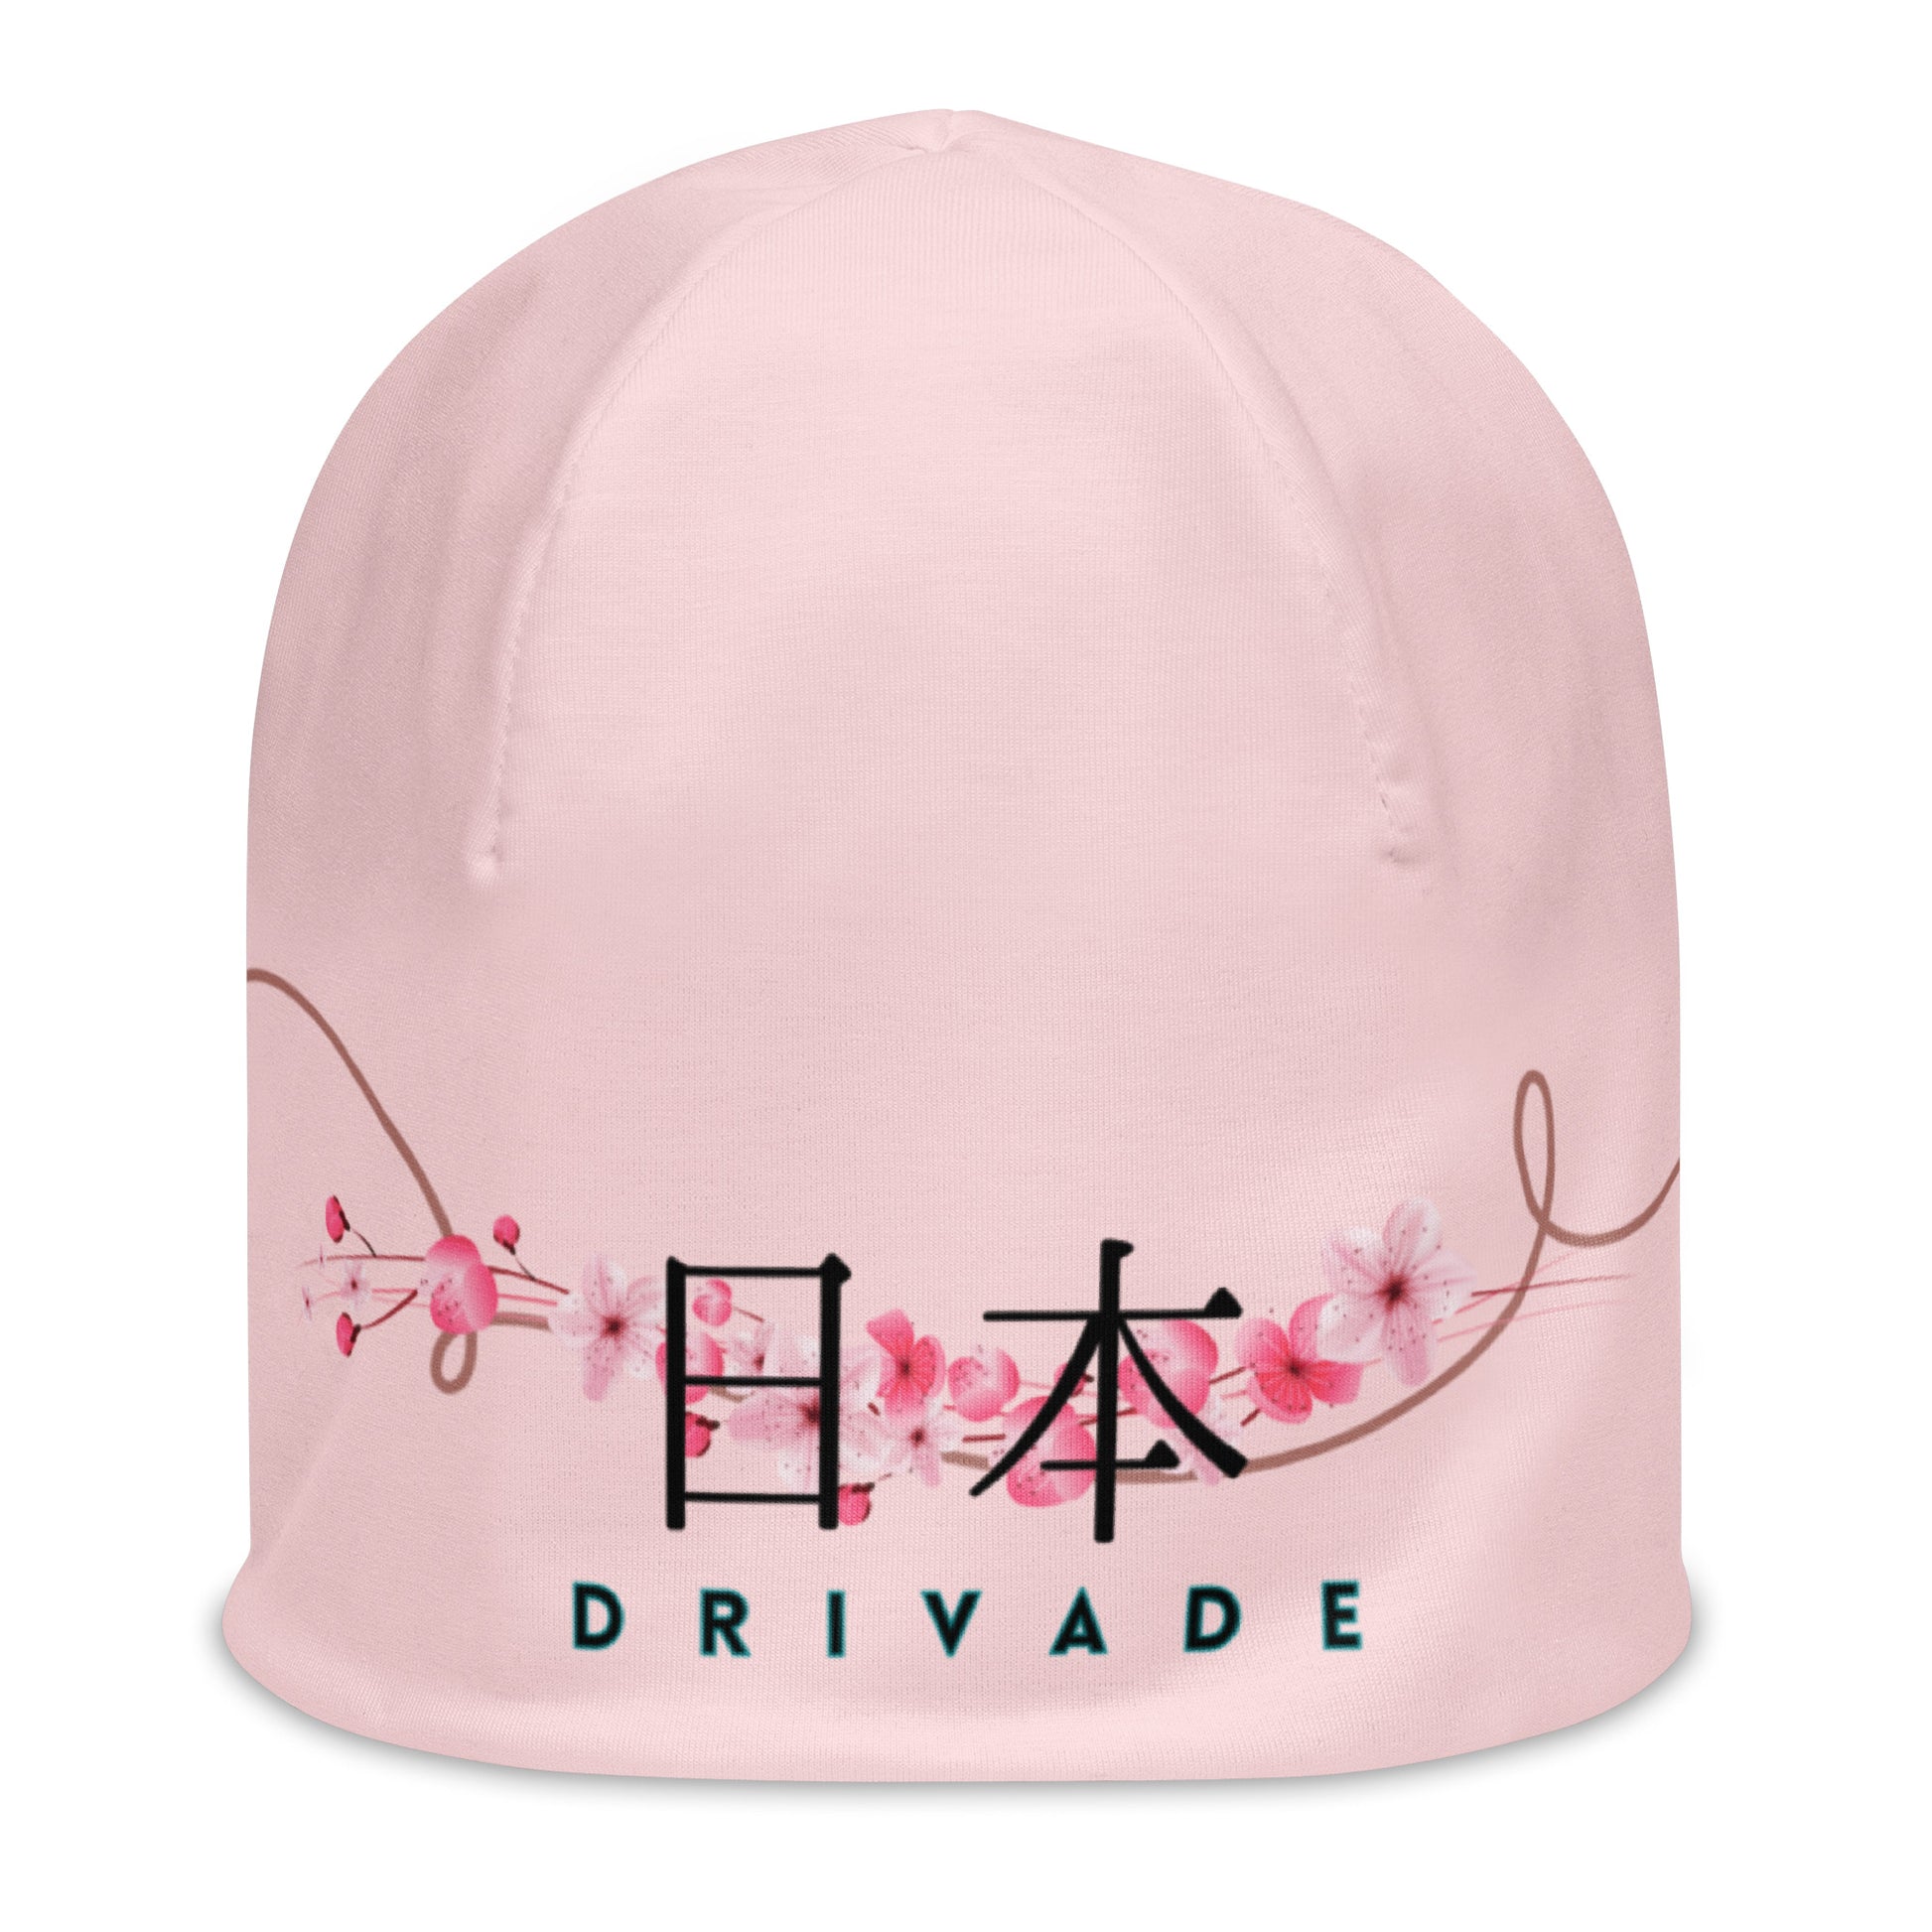 – Cherry hat Pink Blossom DRIVADE Beanie -